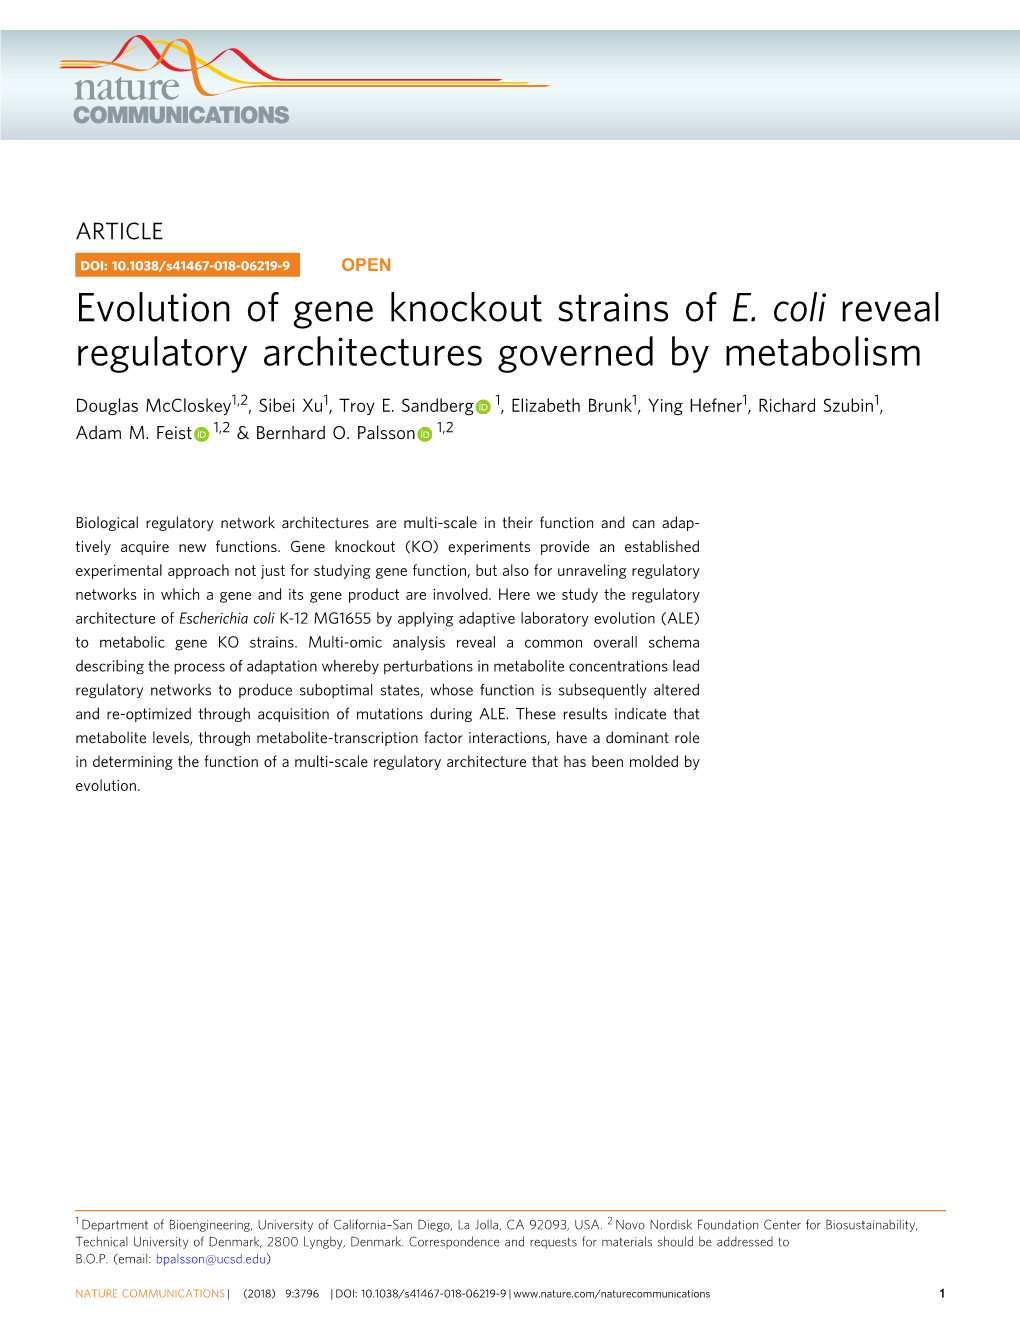 Evolution of Gene Knockout Strains of E. Coli Reveal Regulatory Architectures Governed by Metabolism